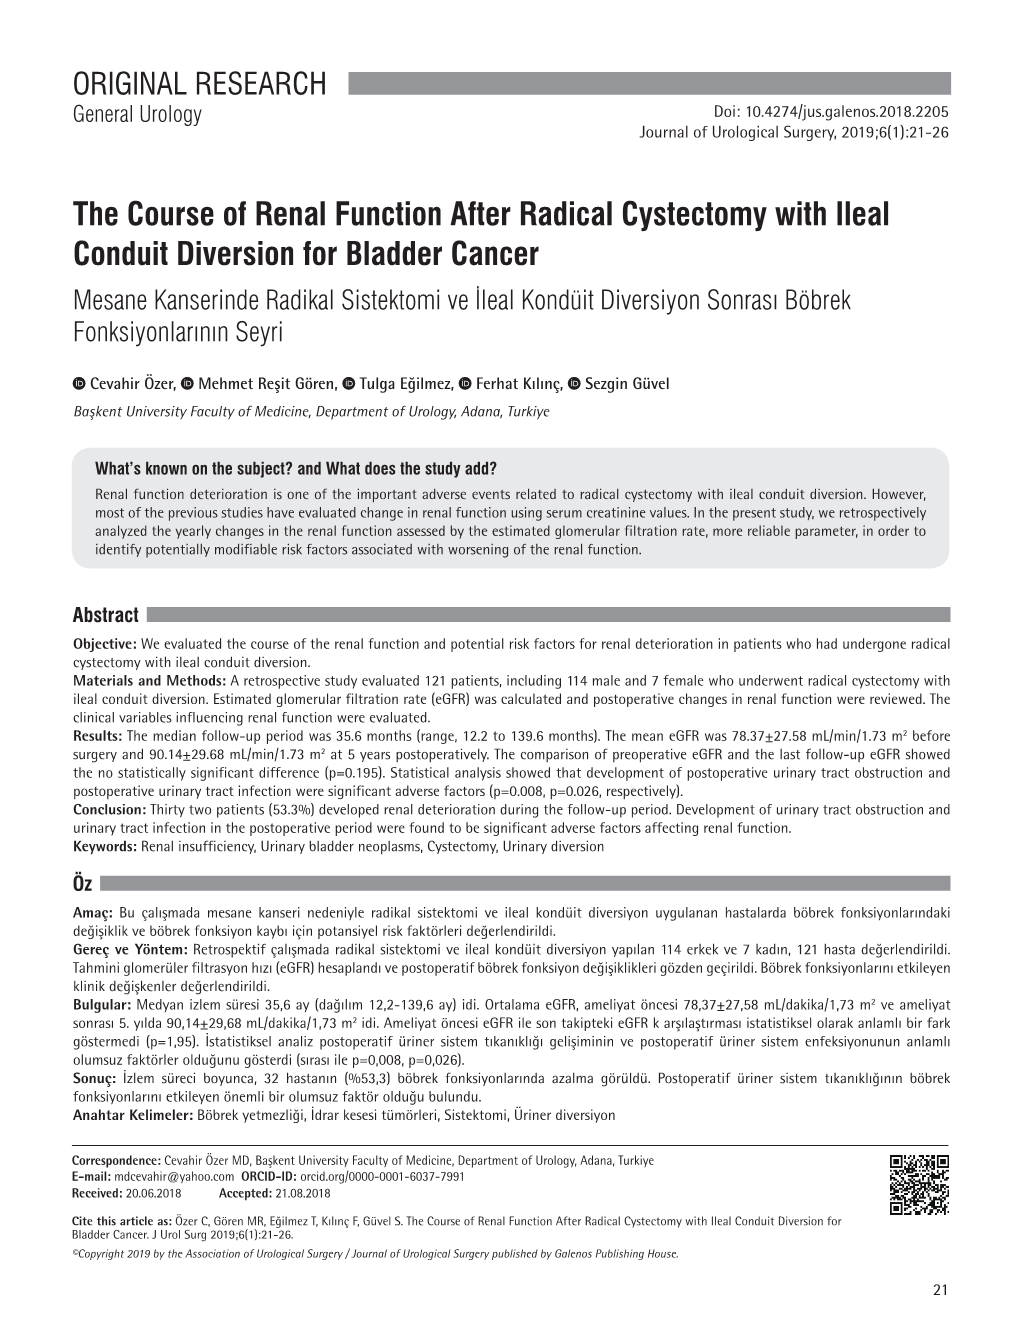 The Course of Renal Function After Radical Cystectomy with Ileal